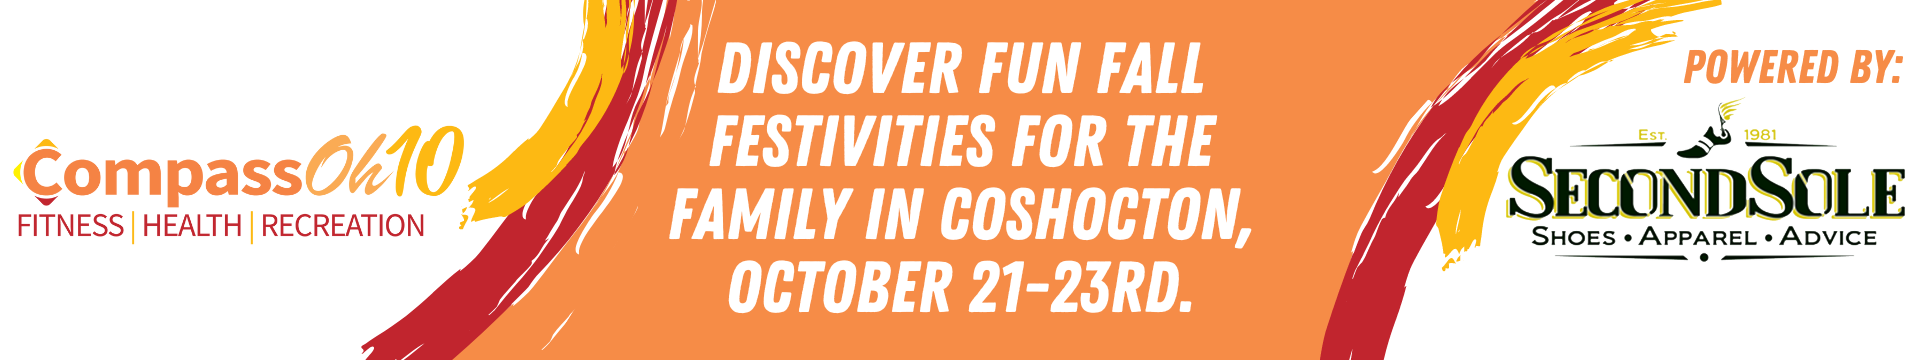 Discover Fun Fall Festivities for the Family in Coshocton, October 21-23rd